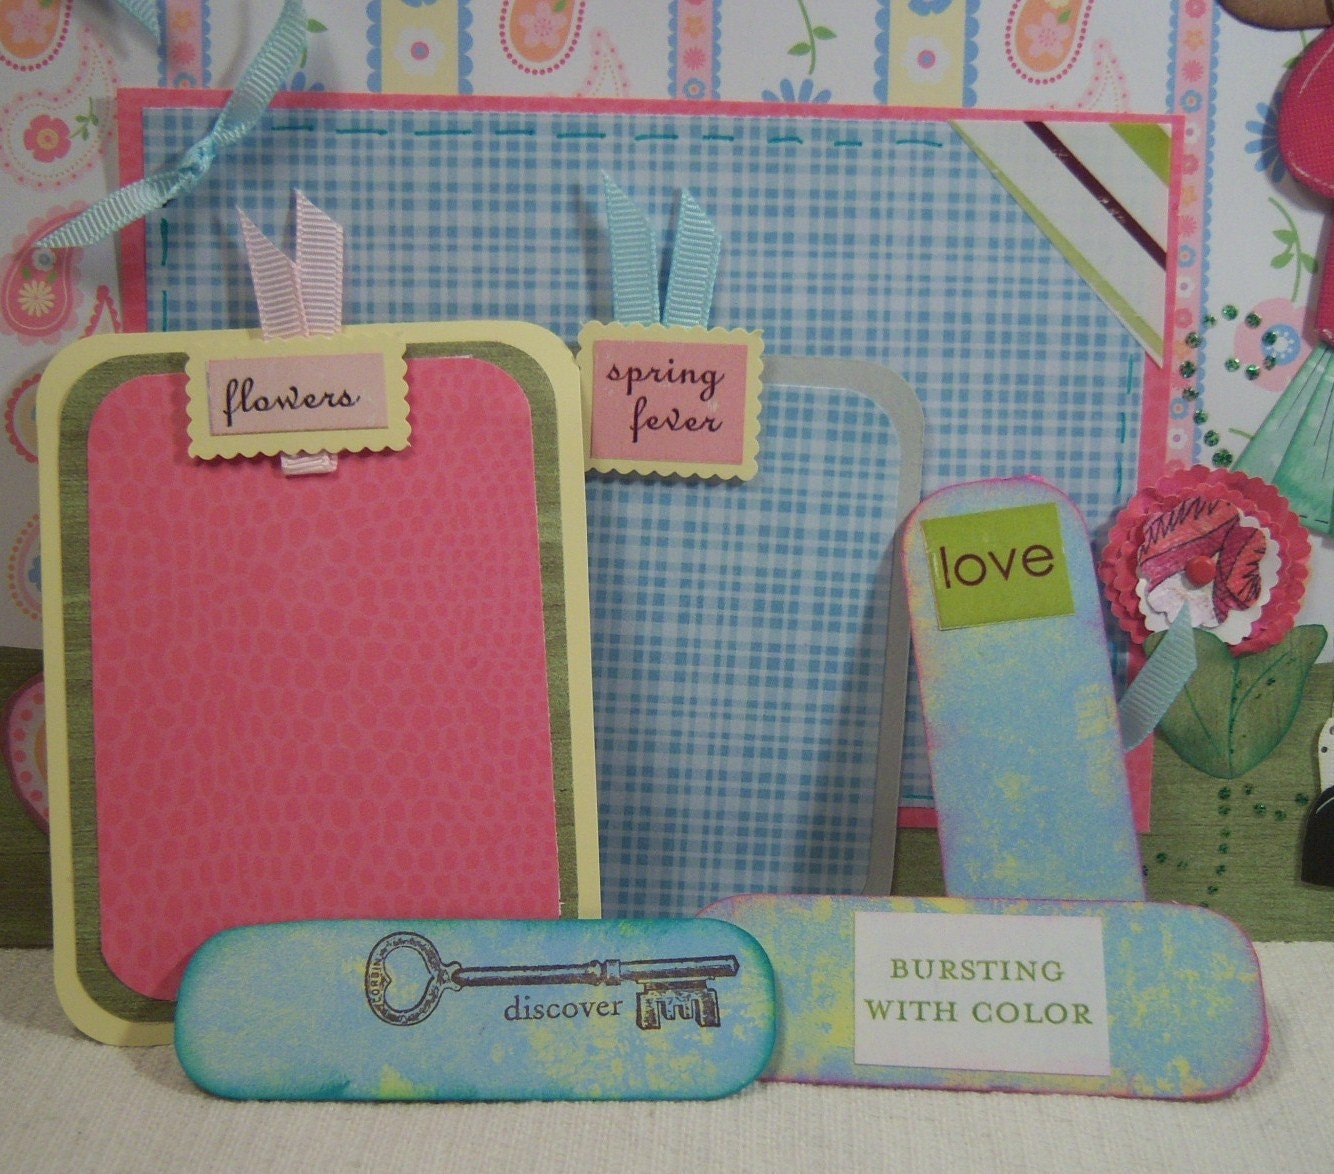 Sweet Girl holding a Bunny Paper Pieced Double Page Layout for Spring or Easter too